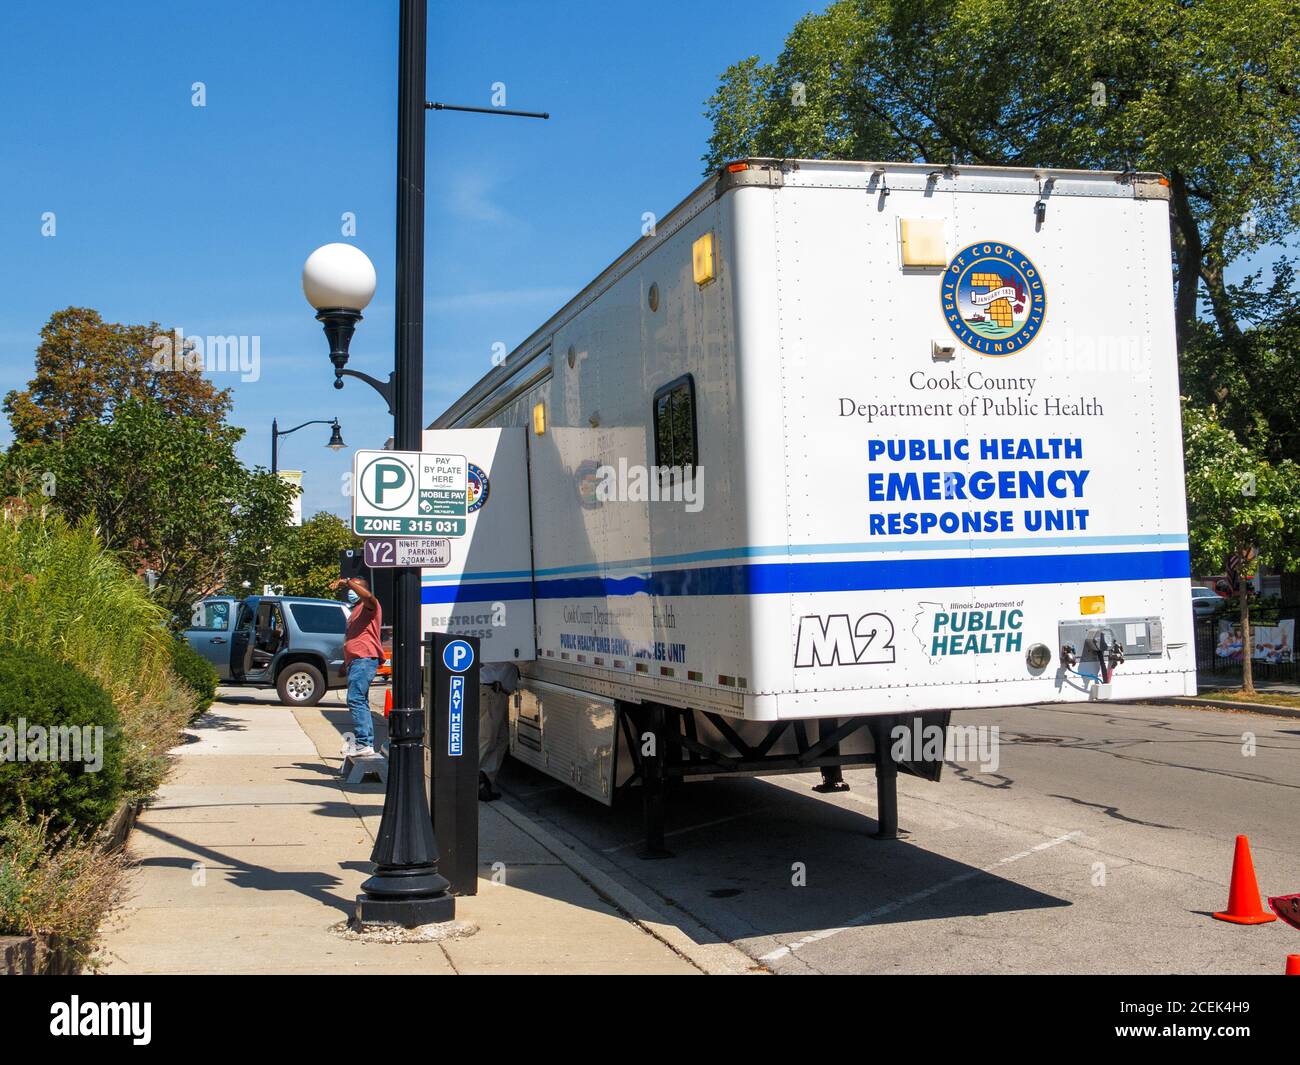 Cook County Department of Public Health Emergency Response Unit. Stockfoto